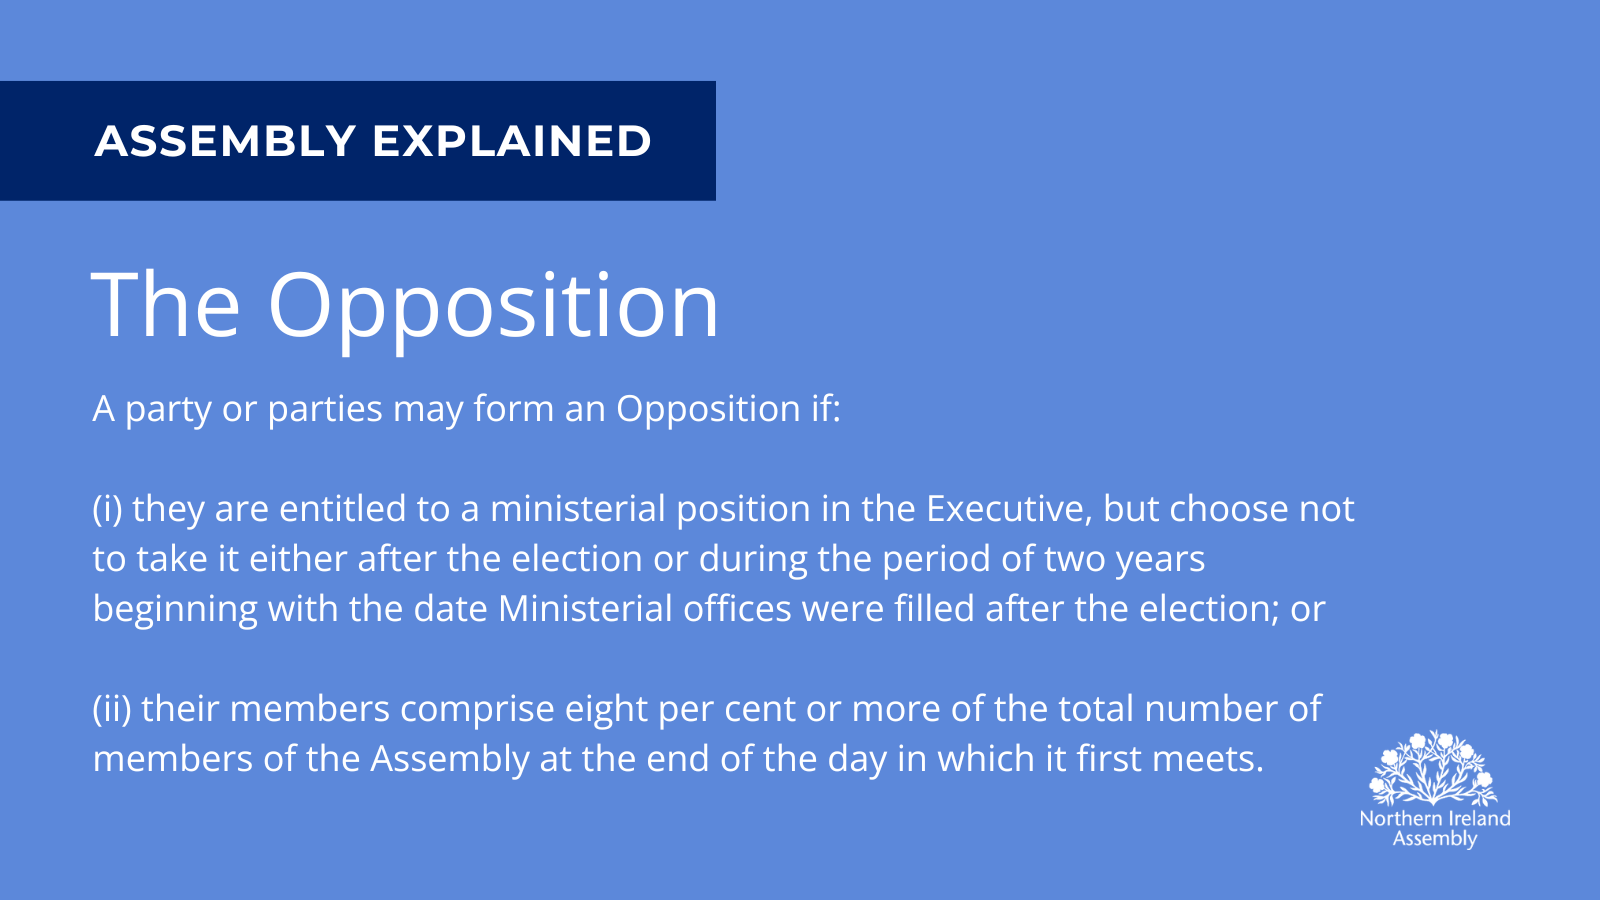 Graphic with a blue background. There is a dark blue banner in the top right with white text that reads "Assembly Exmplained". The graphic also shows in white text the definition of the Opposition that is described in the text of the article.